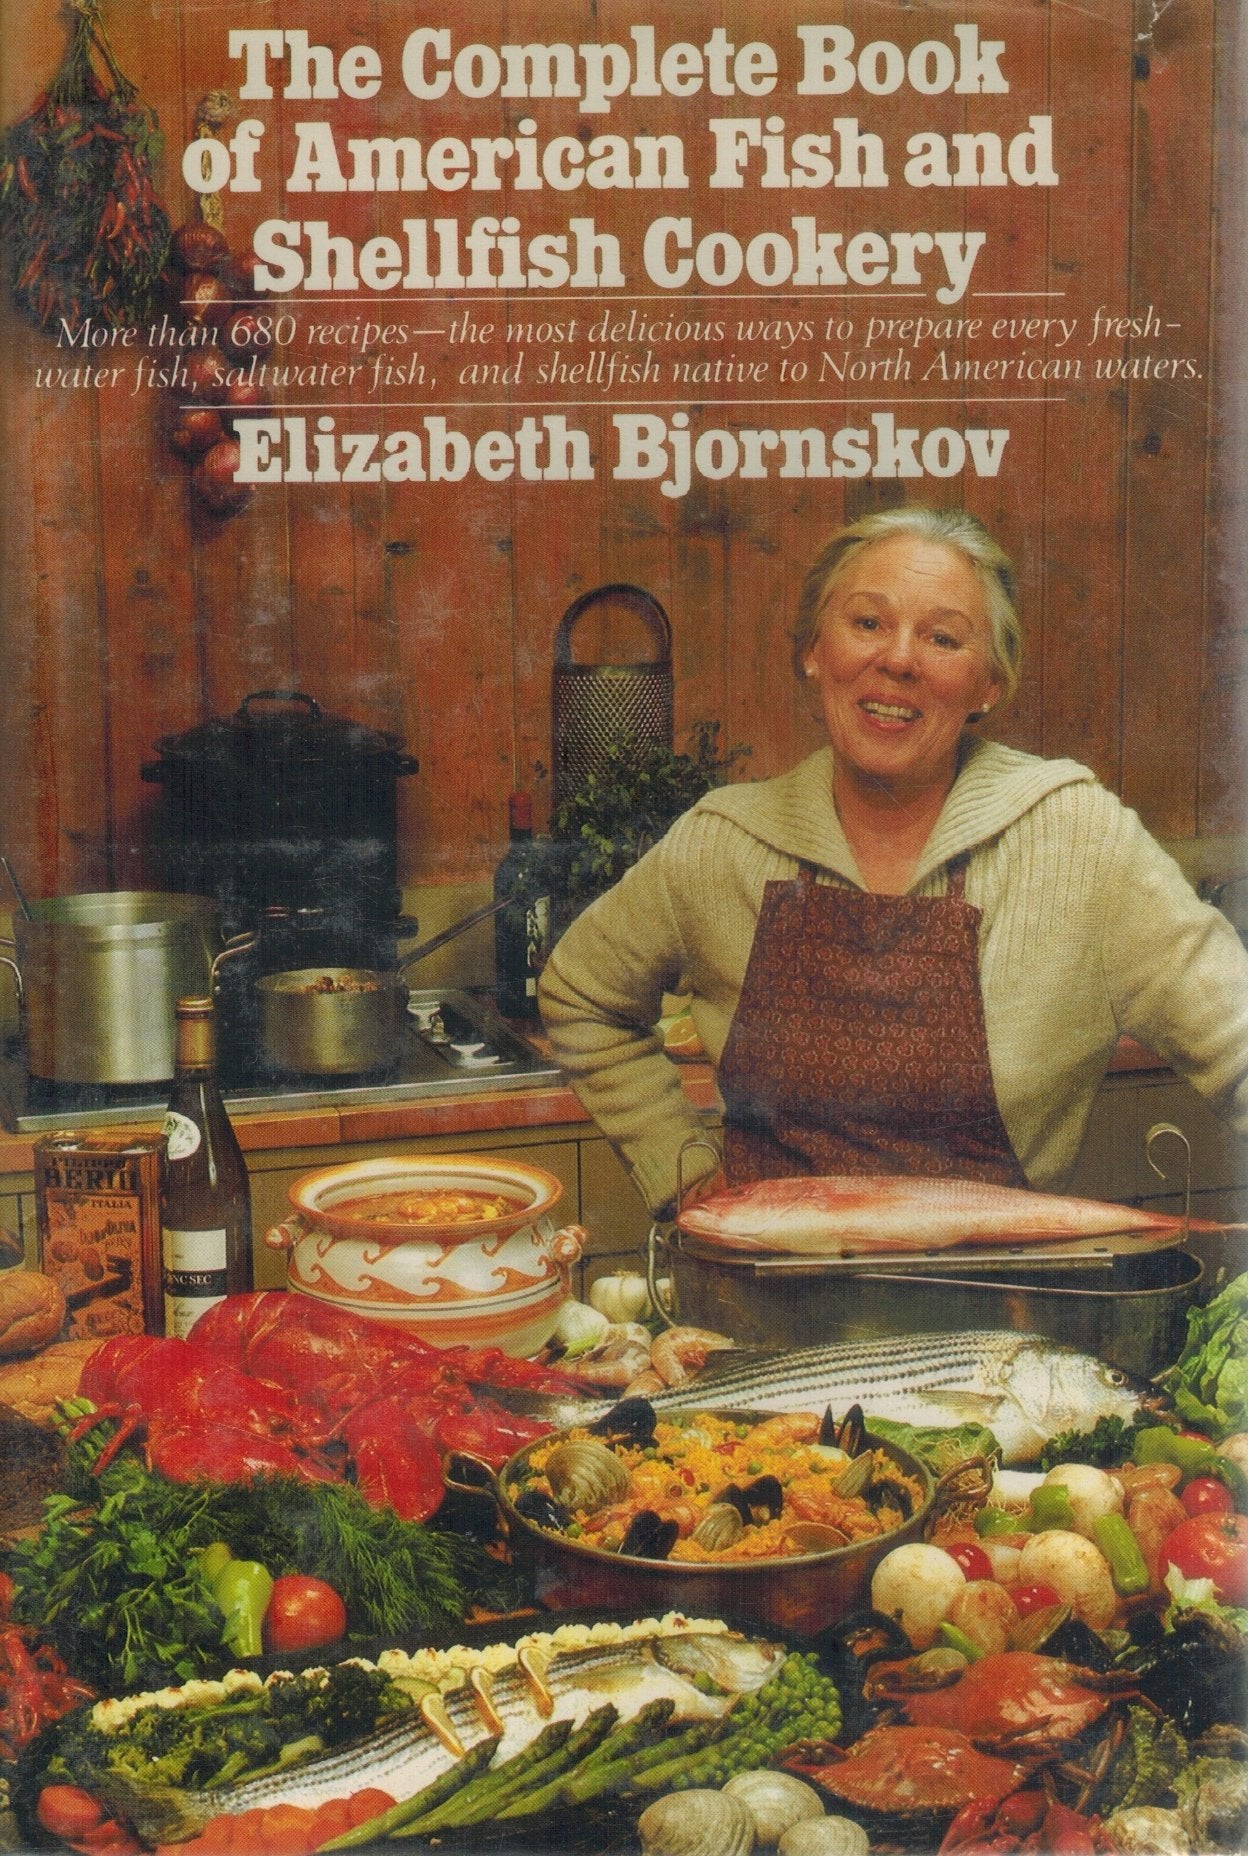 THE COMPLETE BOOK OF AMERICAN FISH AND SHELLFISH COOKERY  by Bjornskov, Elizabeth